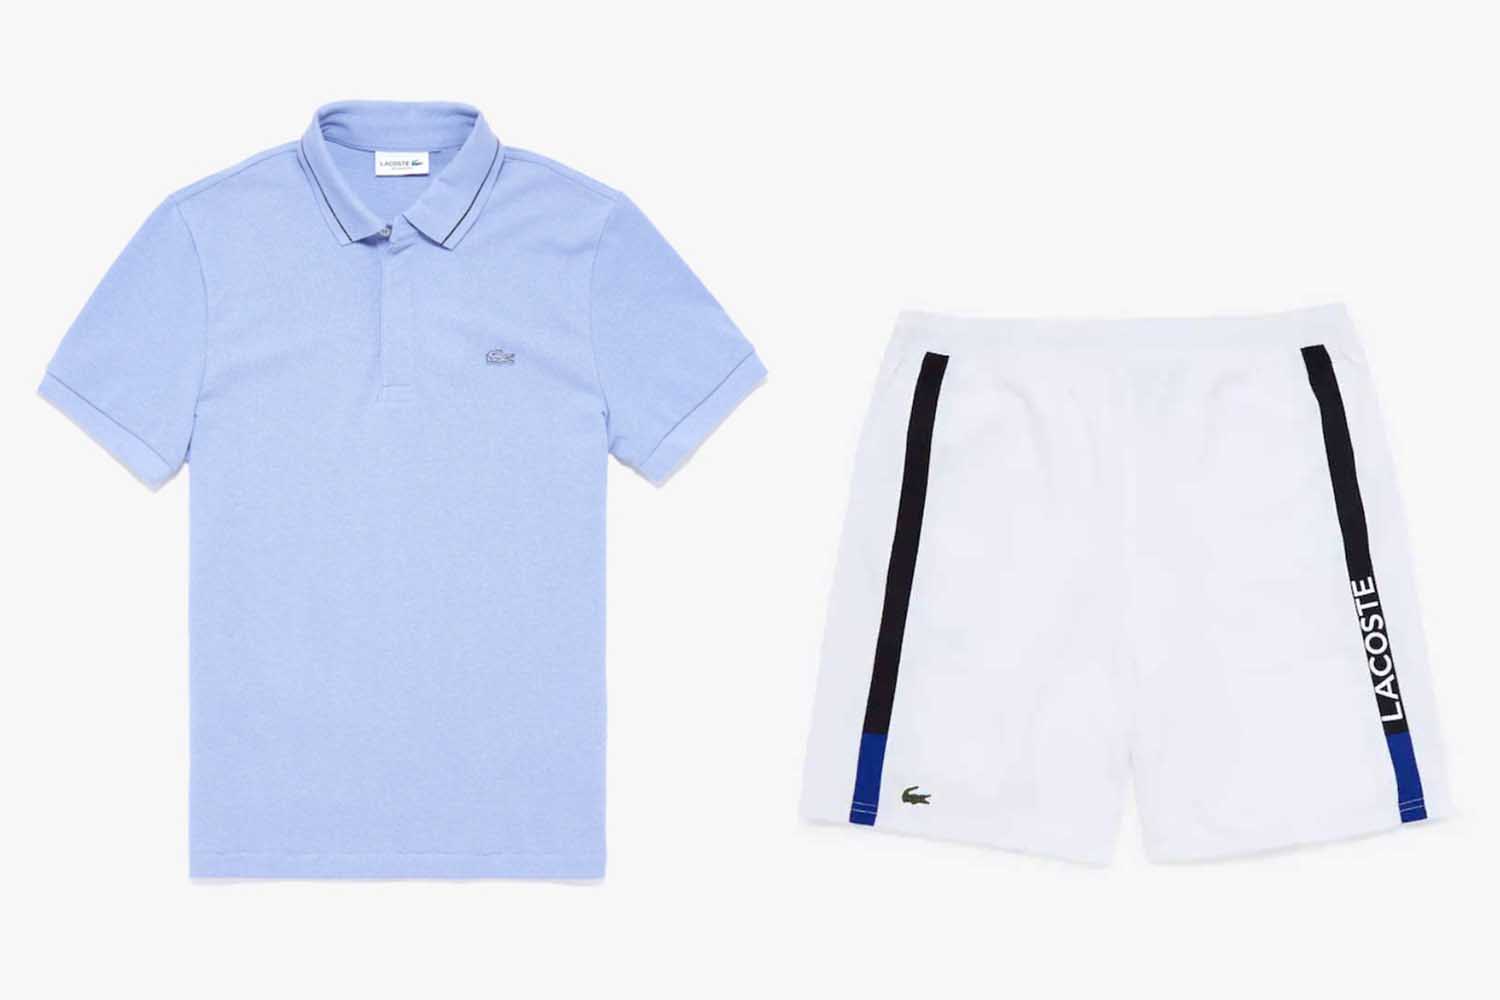 arbejde ulv national Deal: Take an Extra 20% Off Summer Sale Items at Lacoste - InsideHook